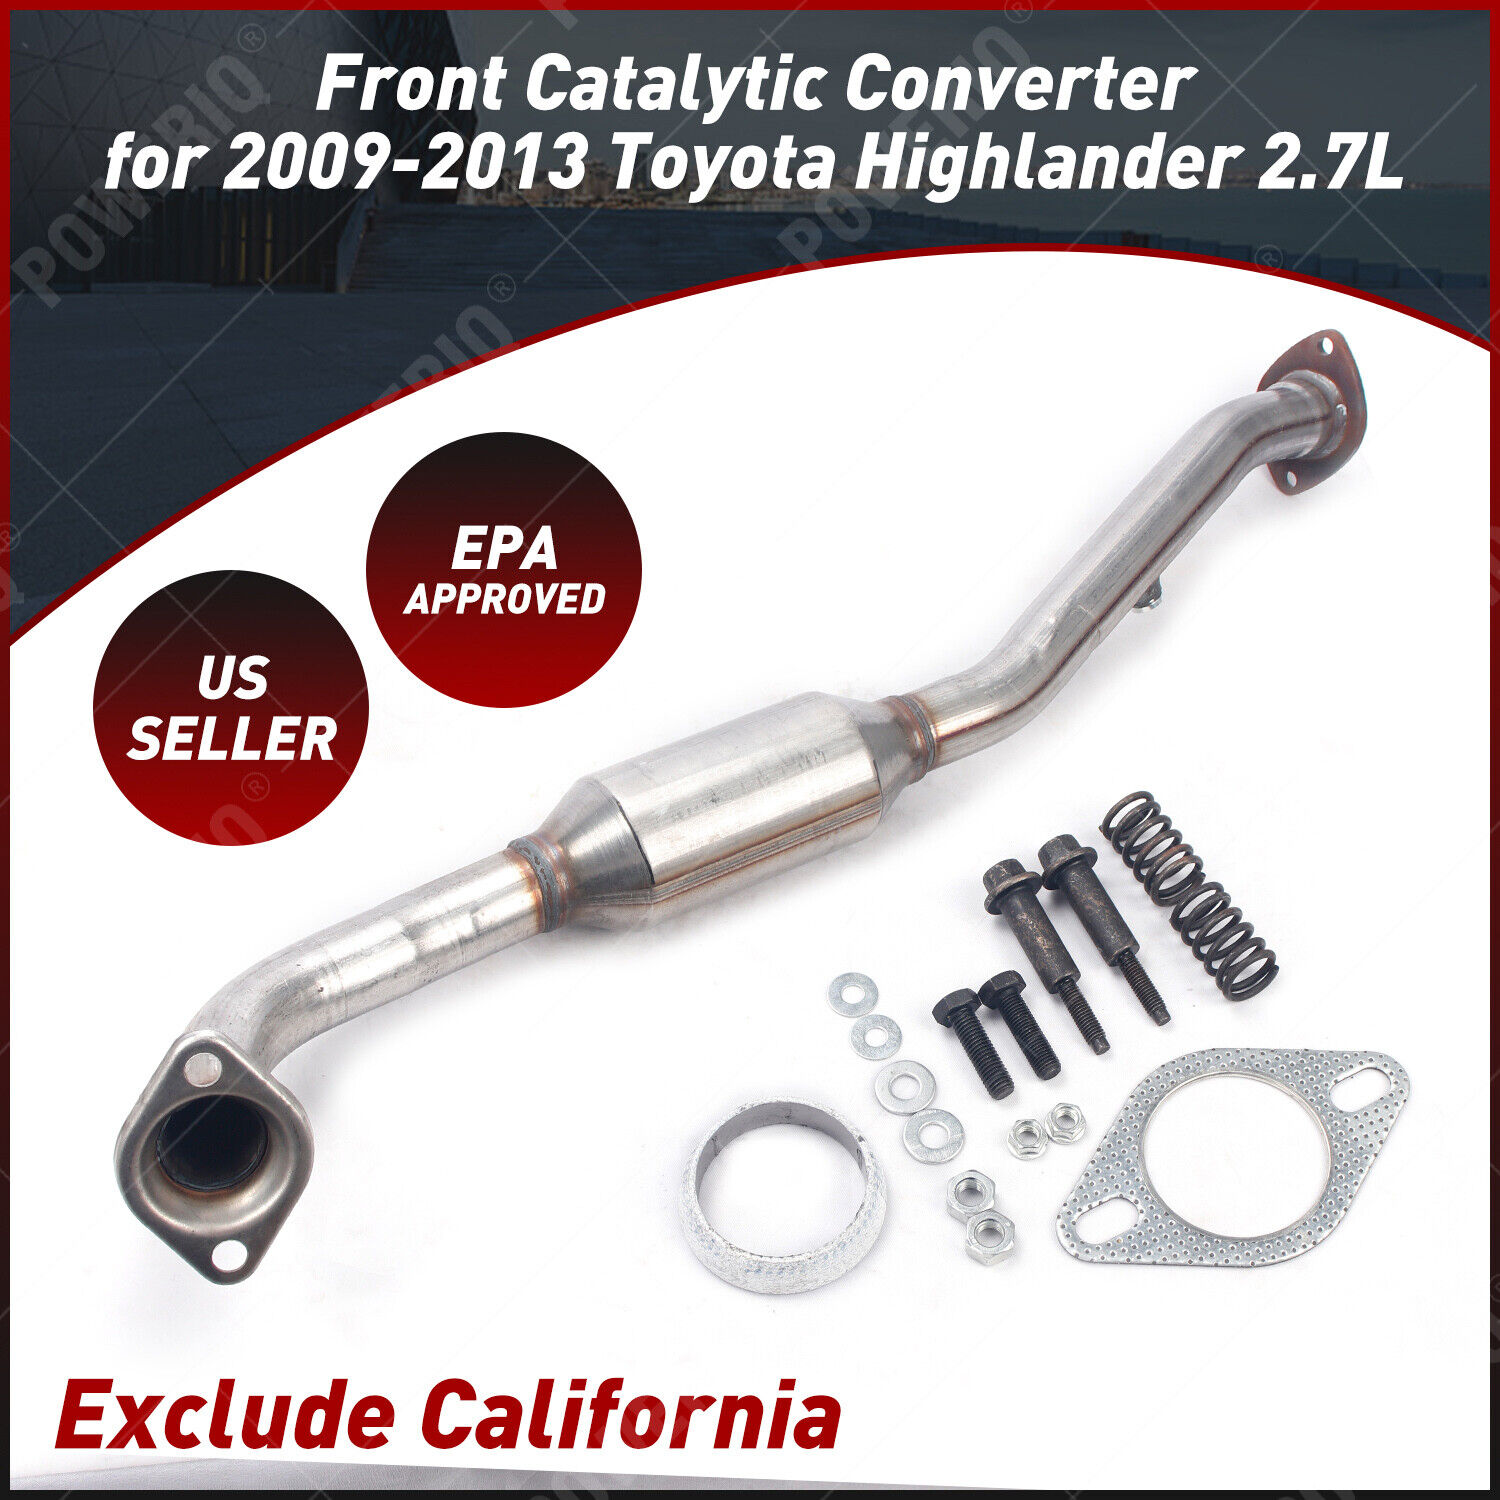 Front Exhaust Catalytic Converter for Toyota Highlander 2.7L 2009-2013 US